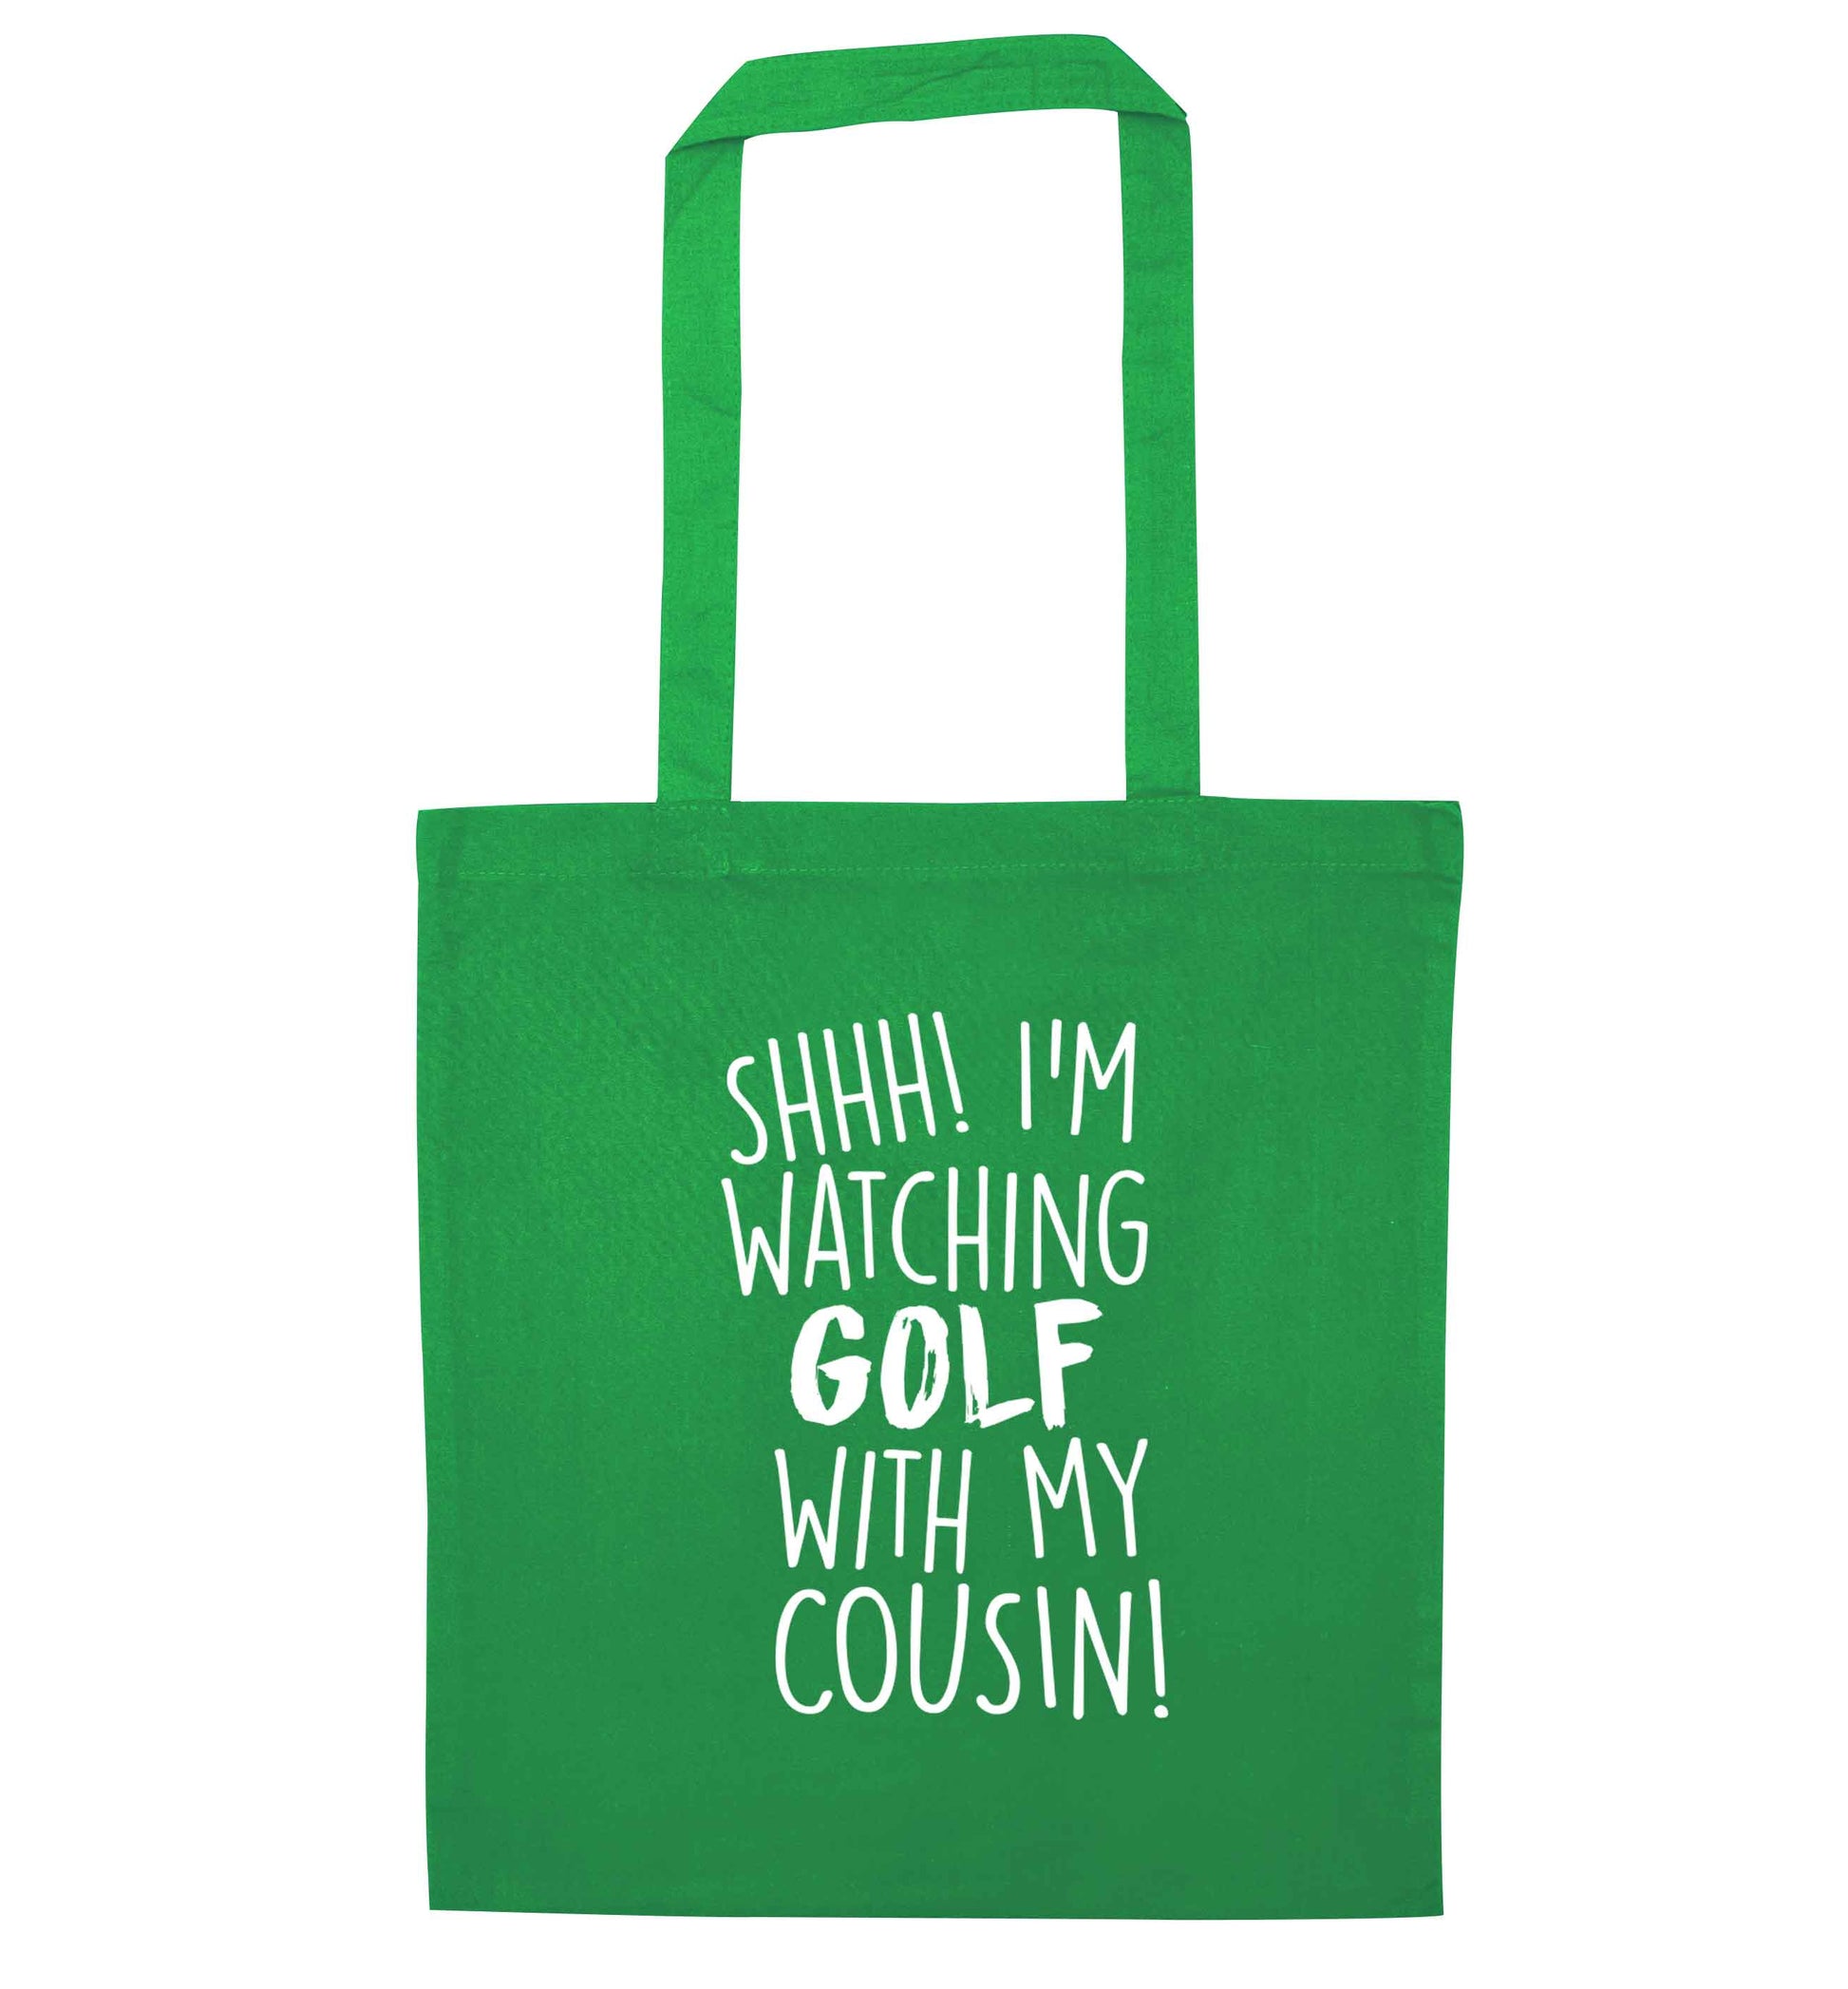 Shh I'm watching golf with my cousin green tote bag